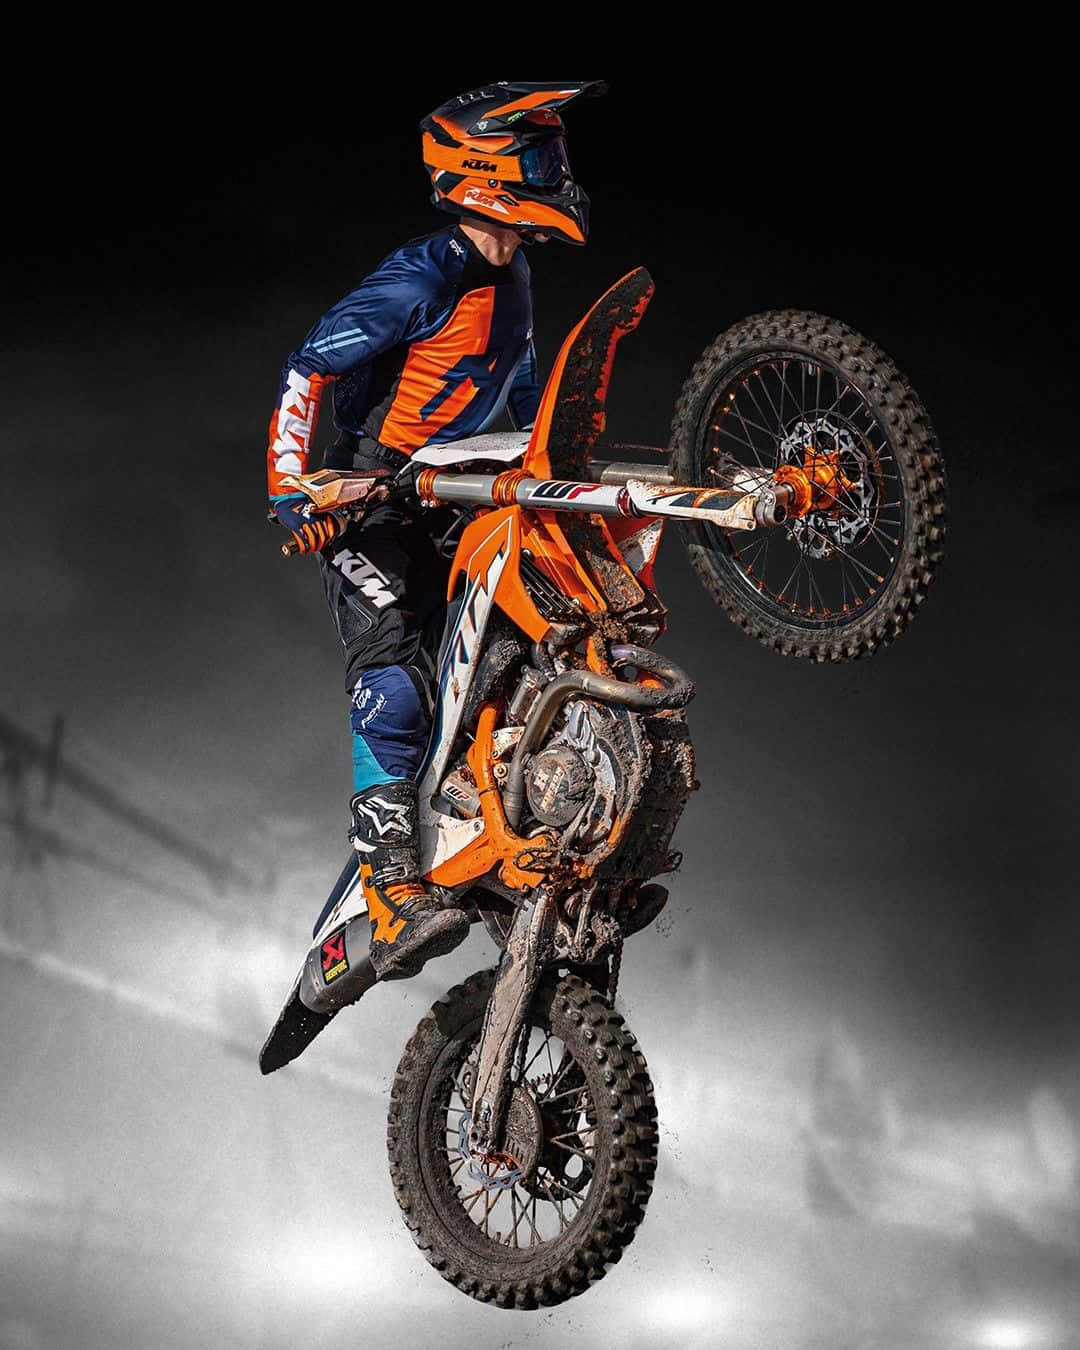 Exciting Ride: Ktm Sports Motorcycle In Action Wallpaper